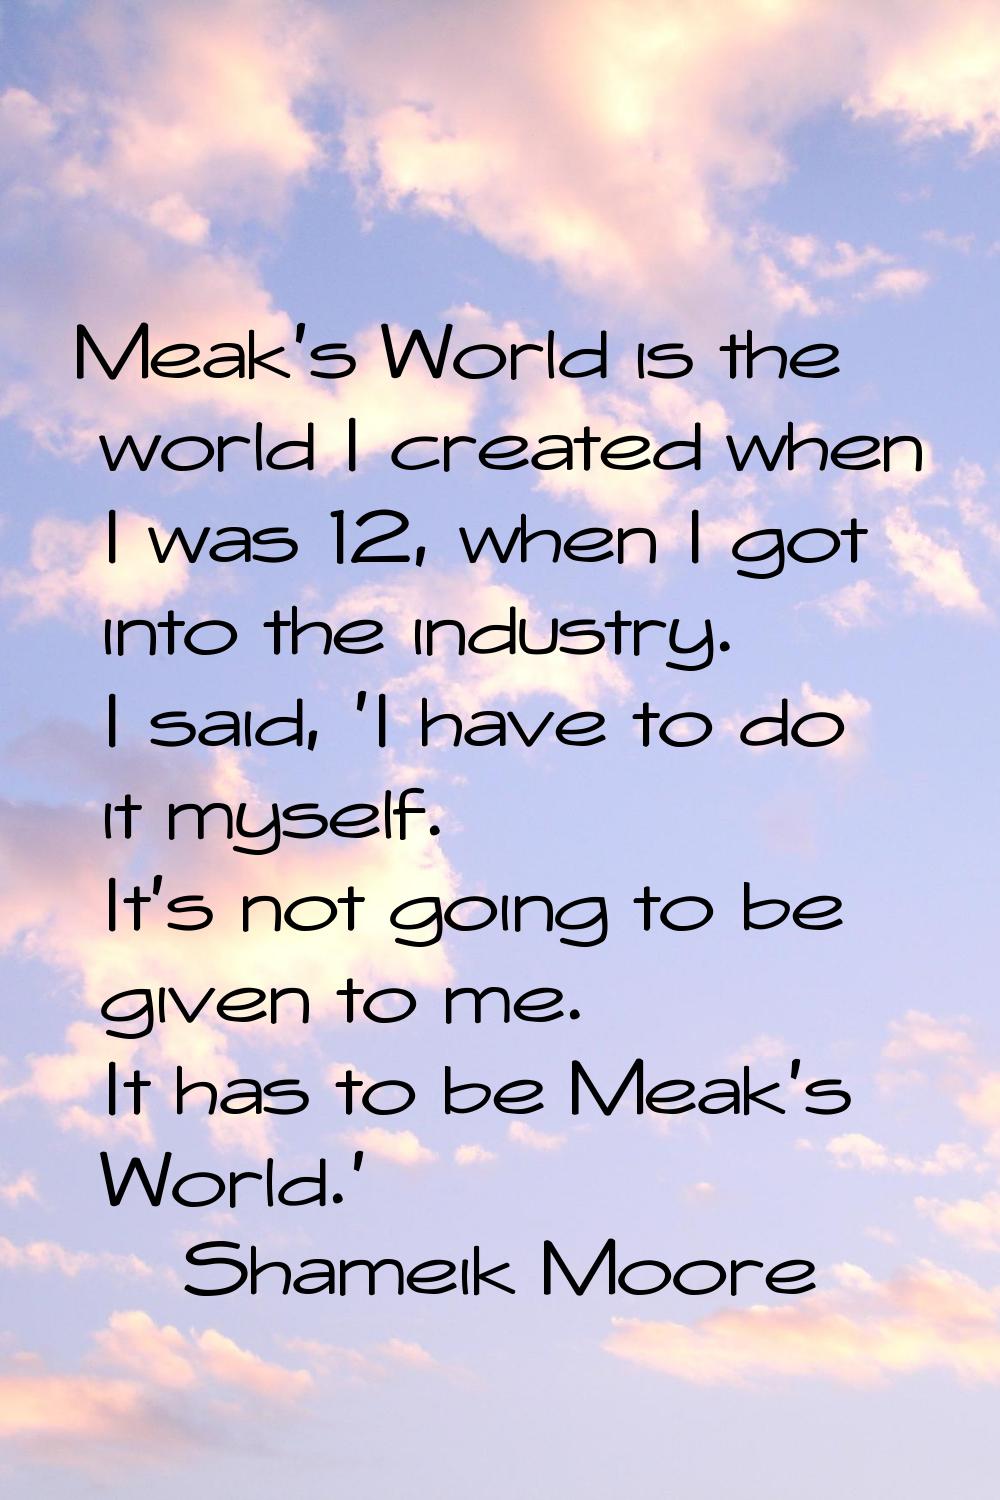 Meak's World is the world I created when I was 12, when I got into the industry. I said, 'I have to